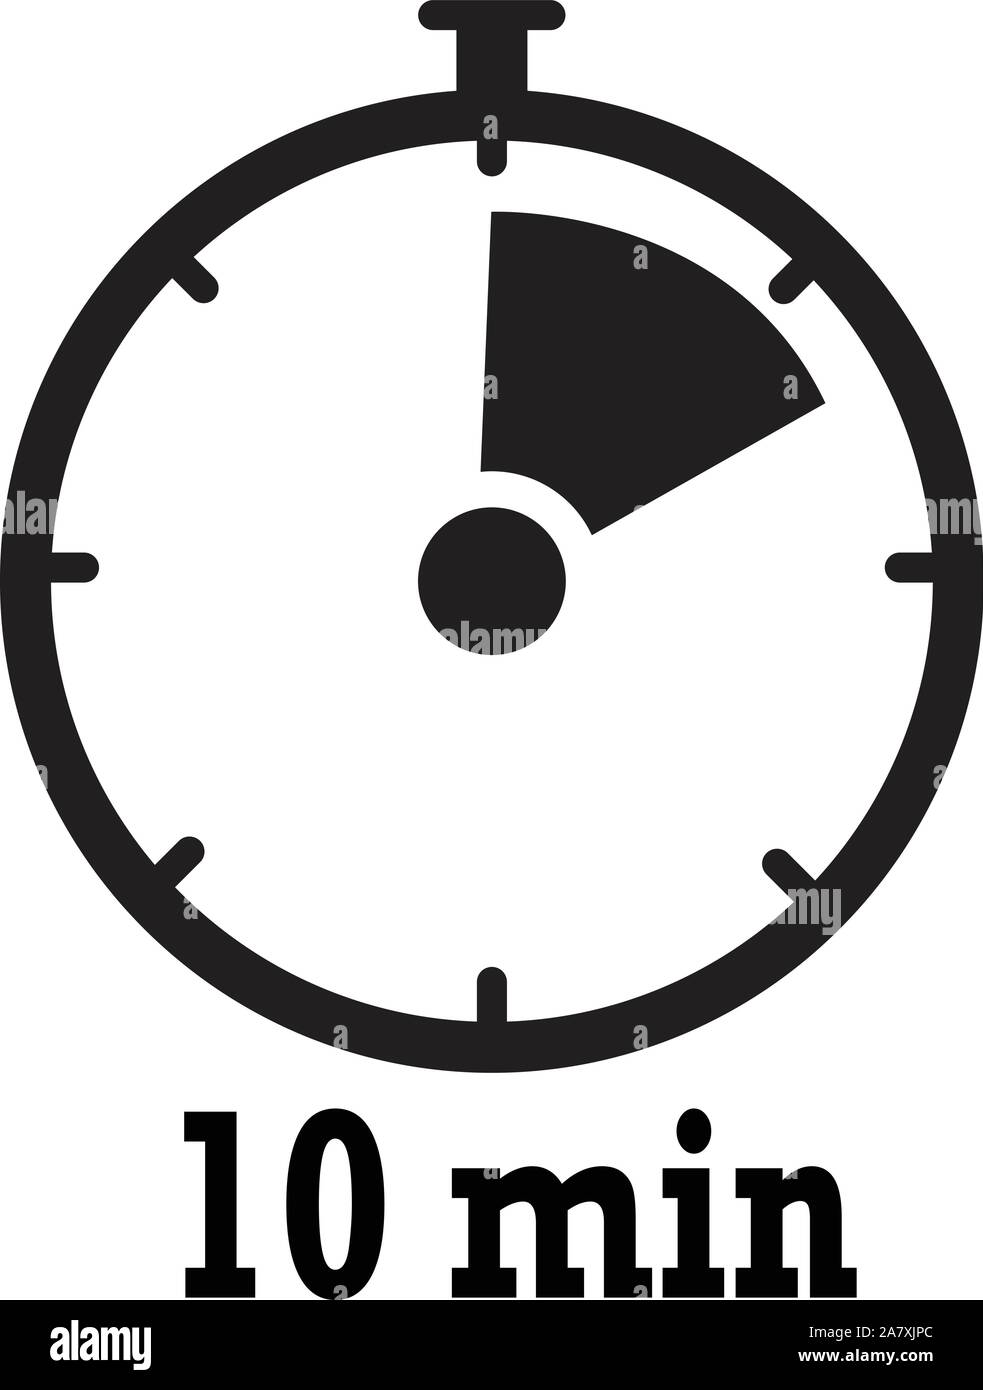 https://c8.alamy.com/comp/2A7XJPC/timer-icon-10-minutes-stopwatch-symbol-flat-icon-on-white-background-2A7XJPC.jpg